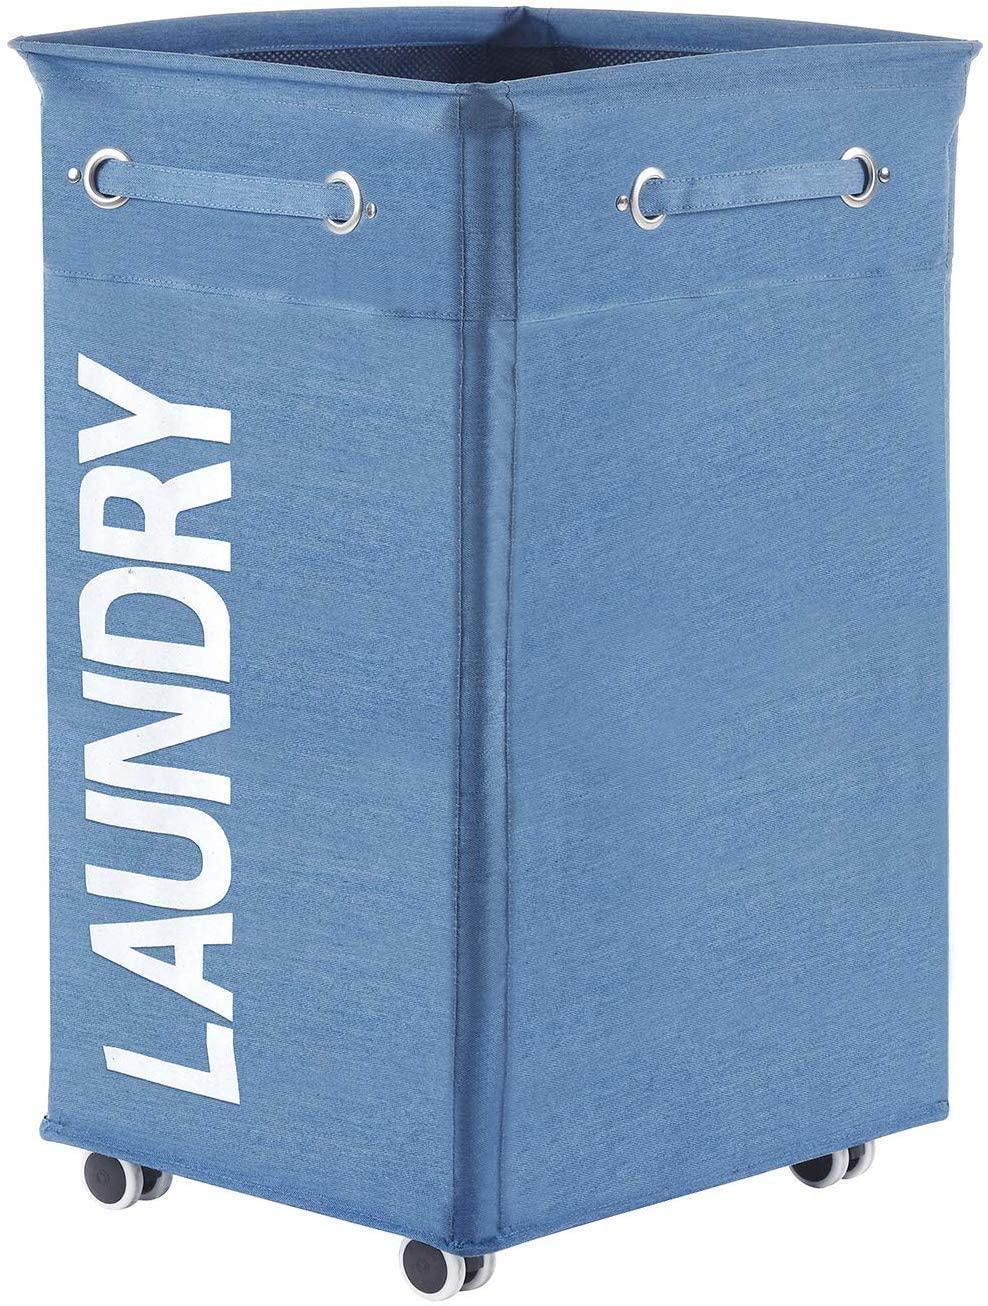 Collapsible Laundry Hamper with Wheels, Waterproof Large Rolling Clothes Hamper Basket for Dirty Clothes Storage Bin